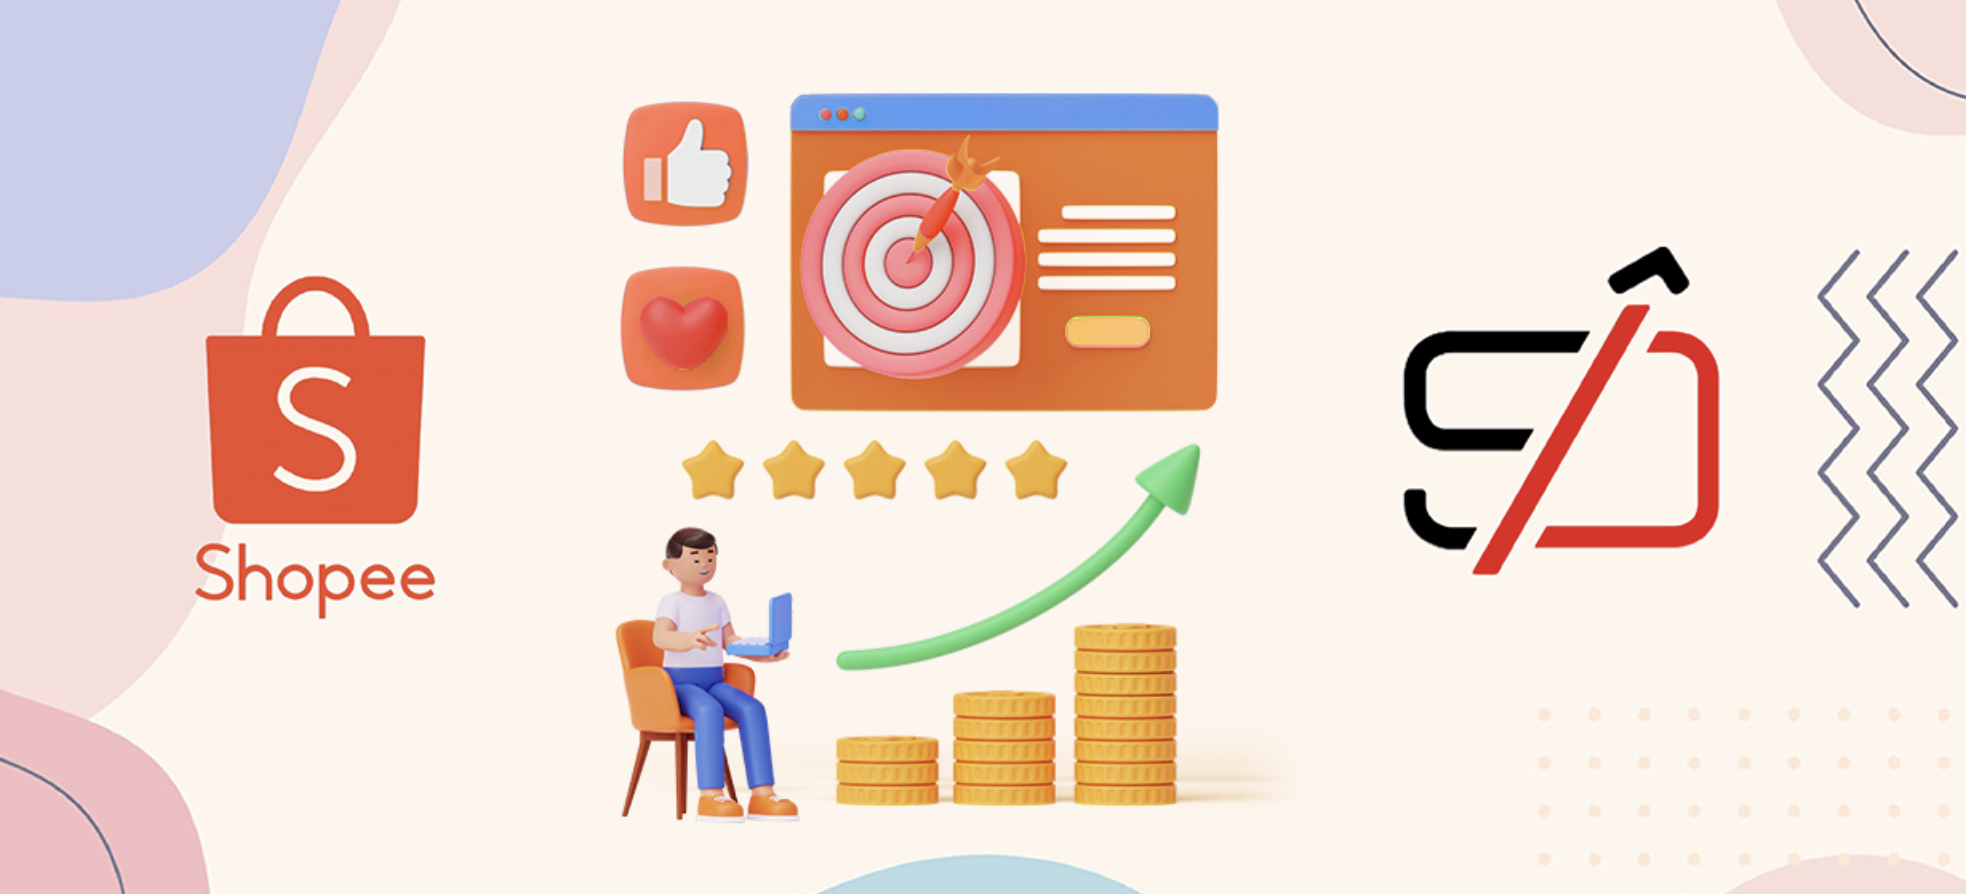 6 Easy Ways to Succeed For Selling on Shopee